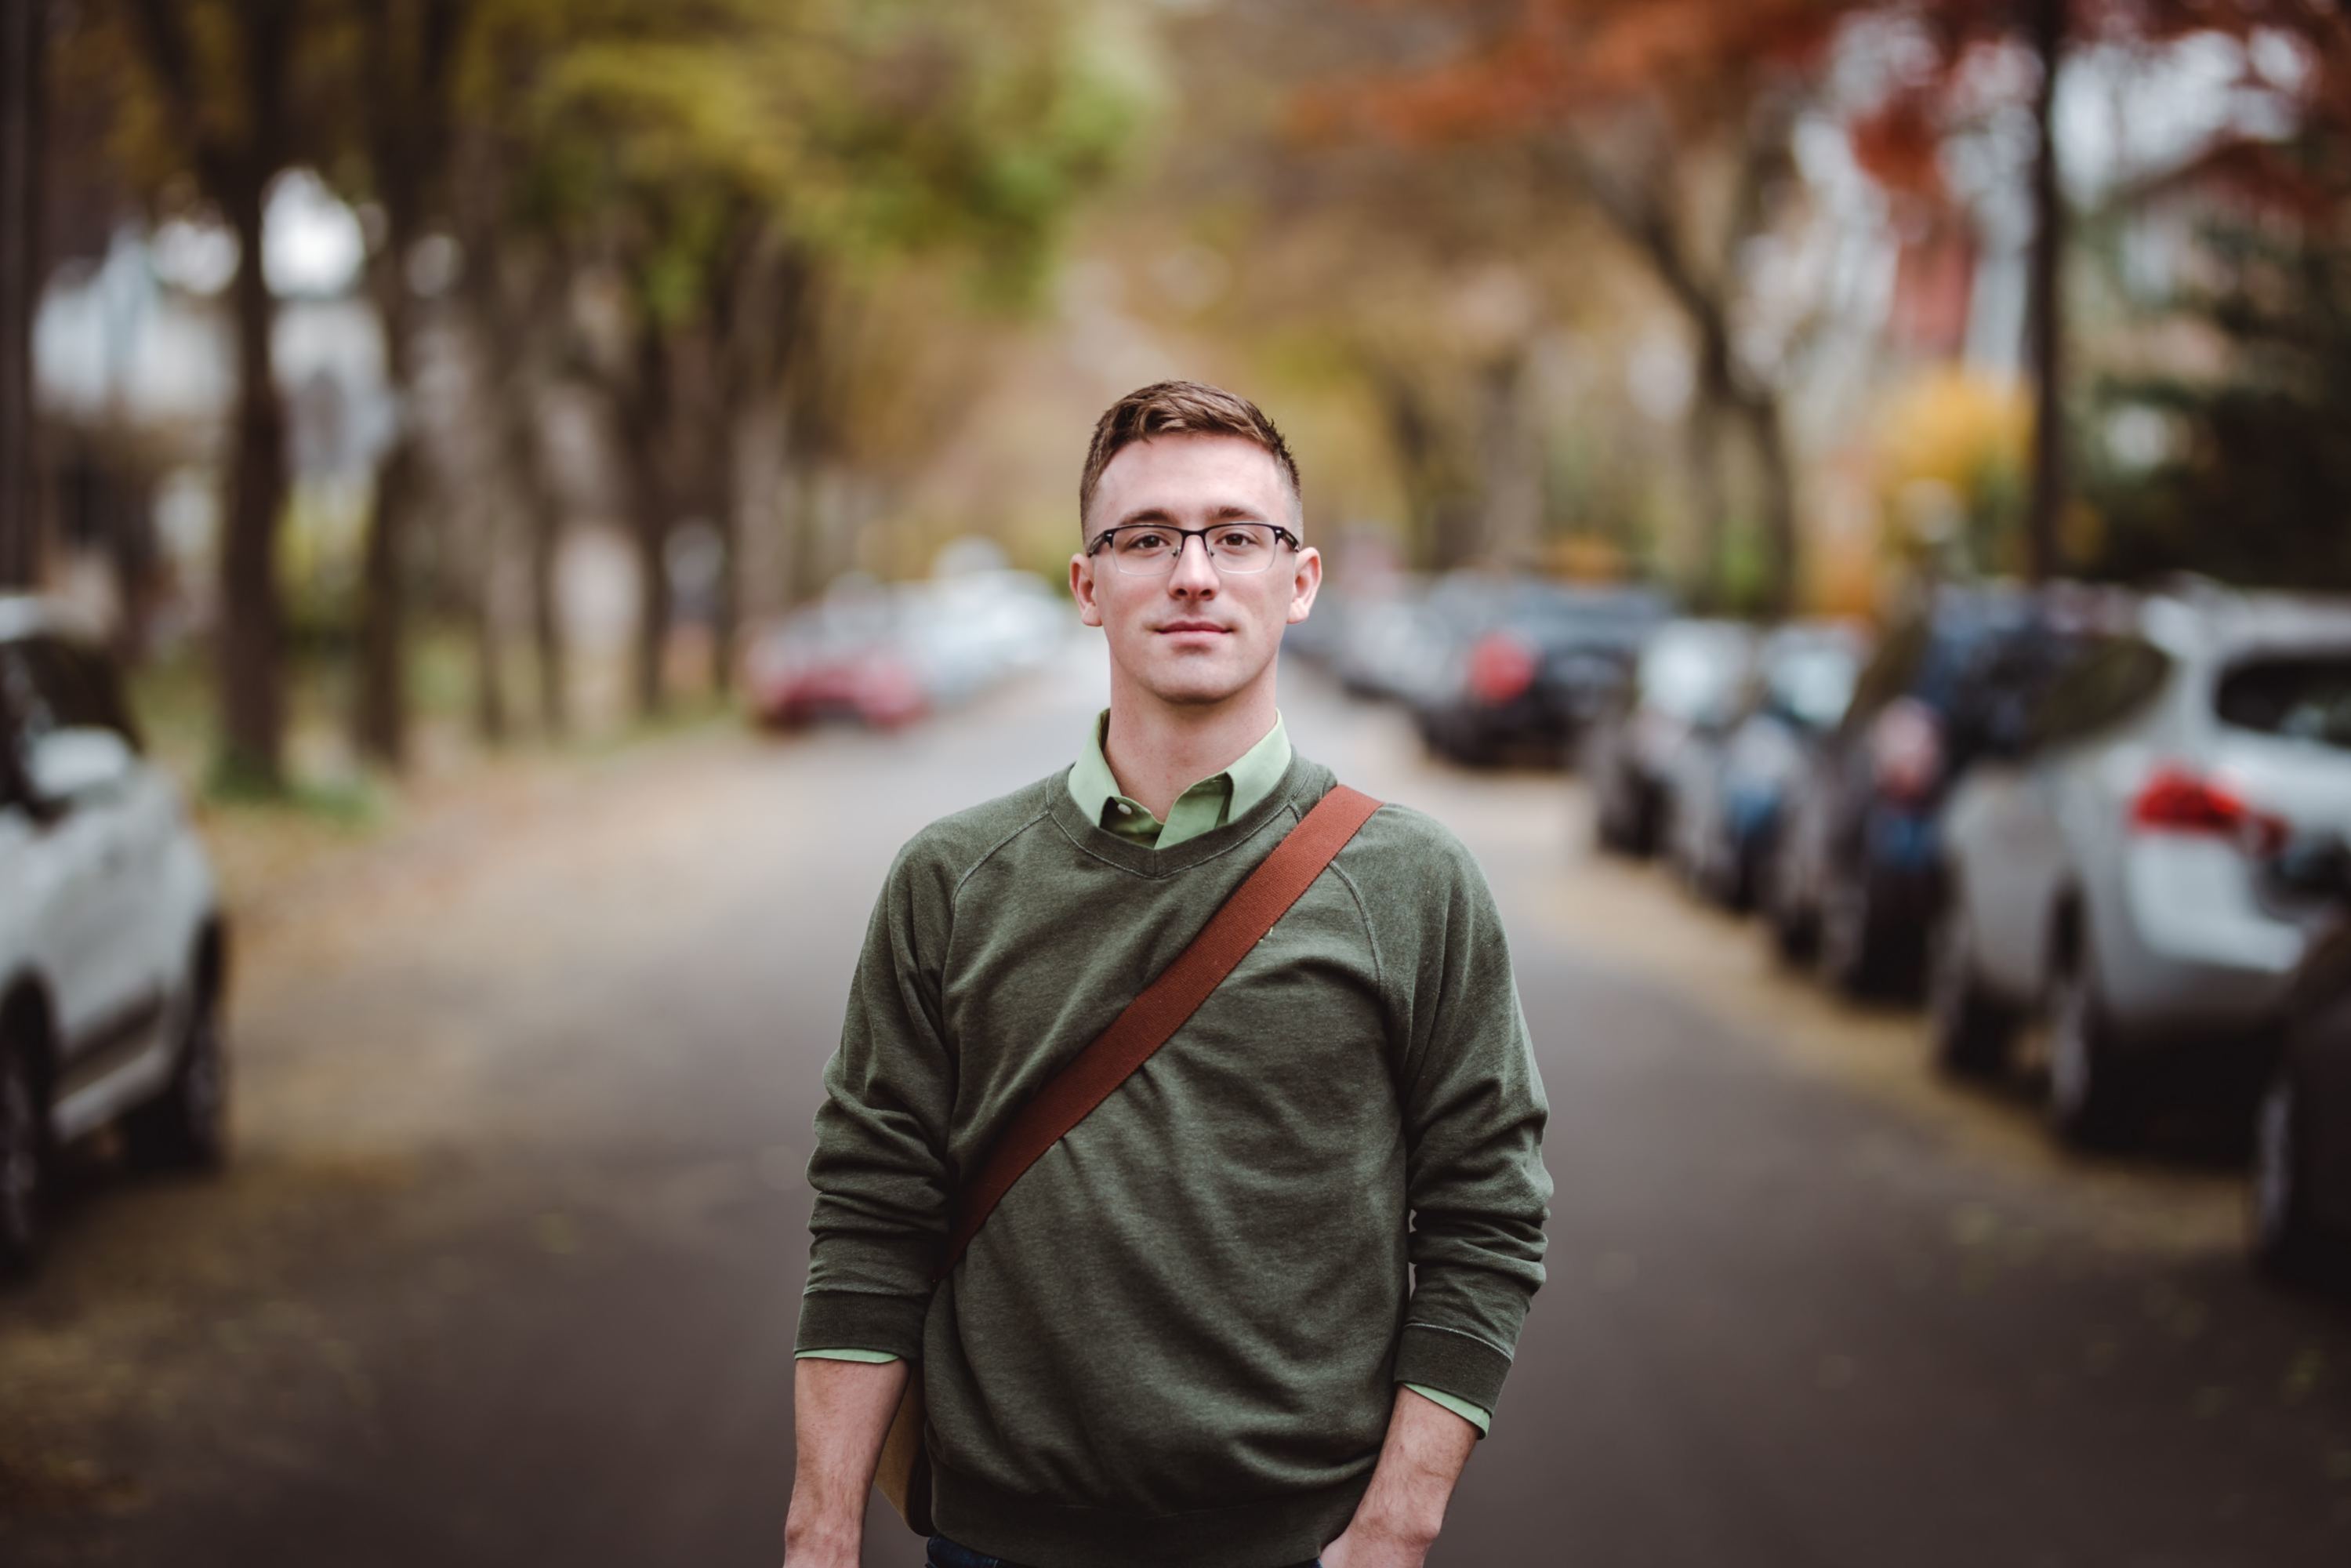 Young man in street gregory-hayes-2guarBycJJQ-unsplash